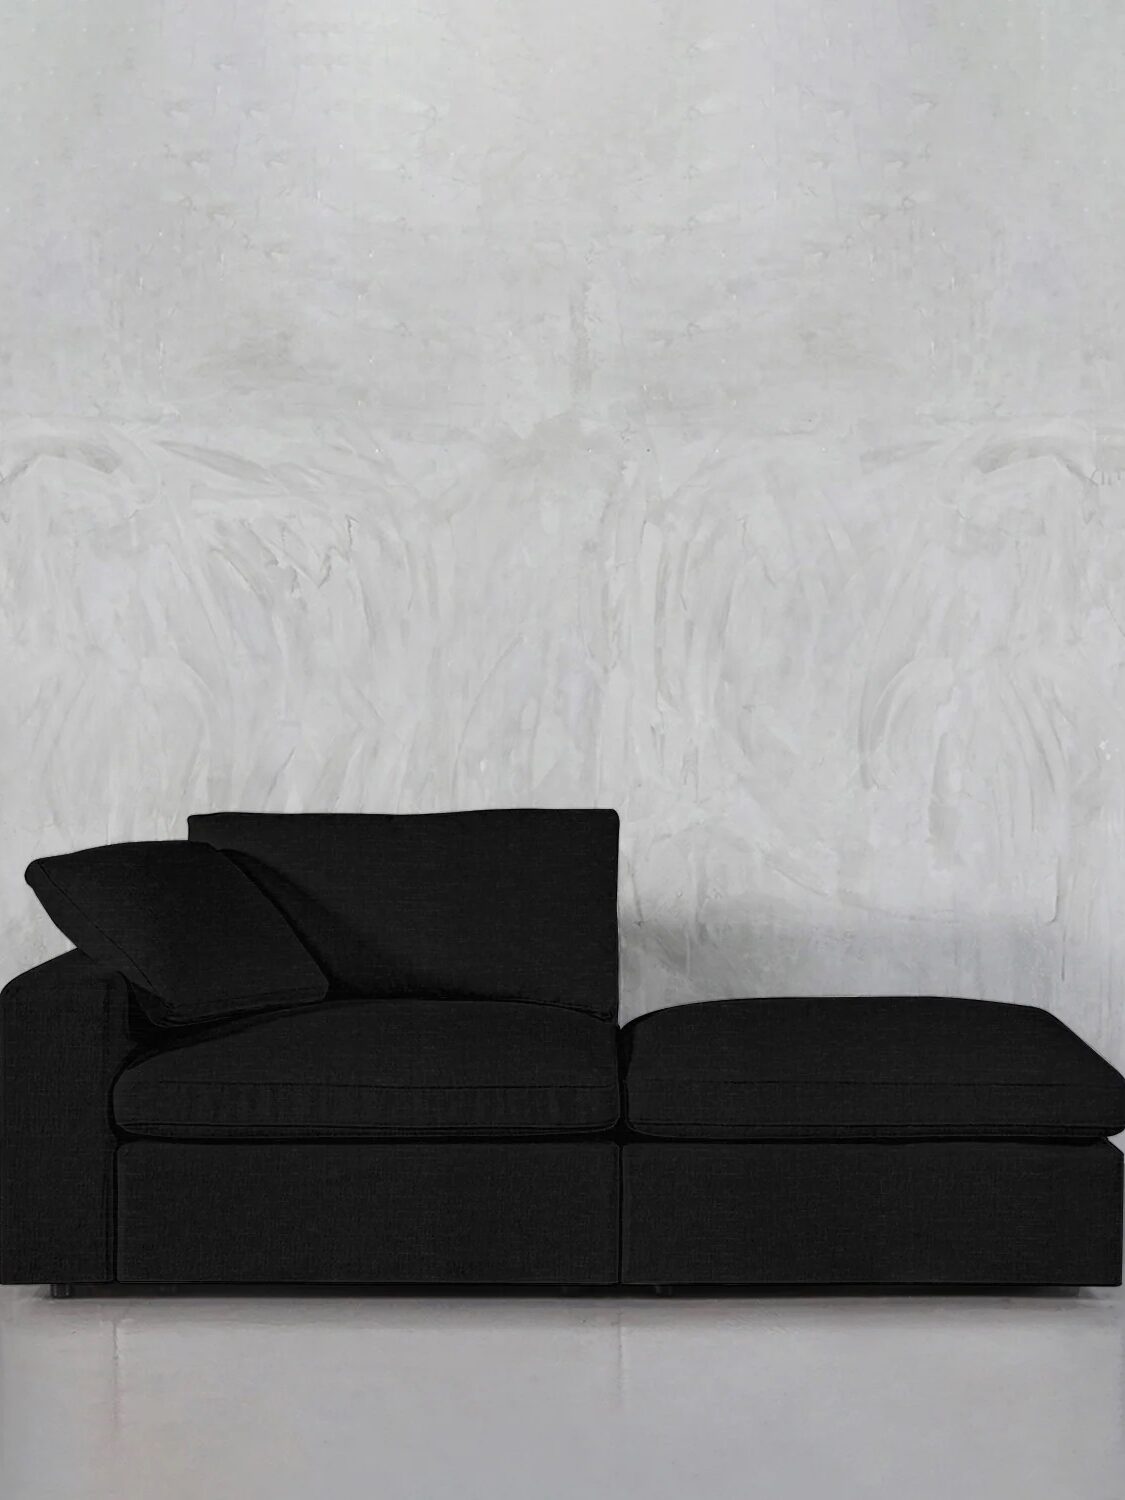 A black sectional sofa with a chaise lounge is situated against a plain, light-colored wall.